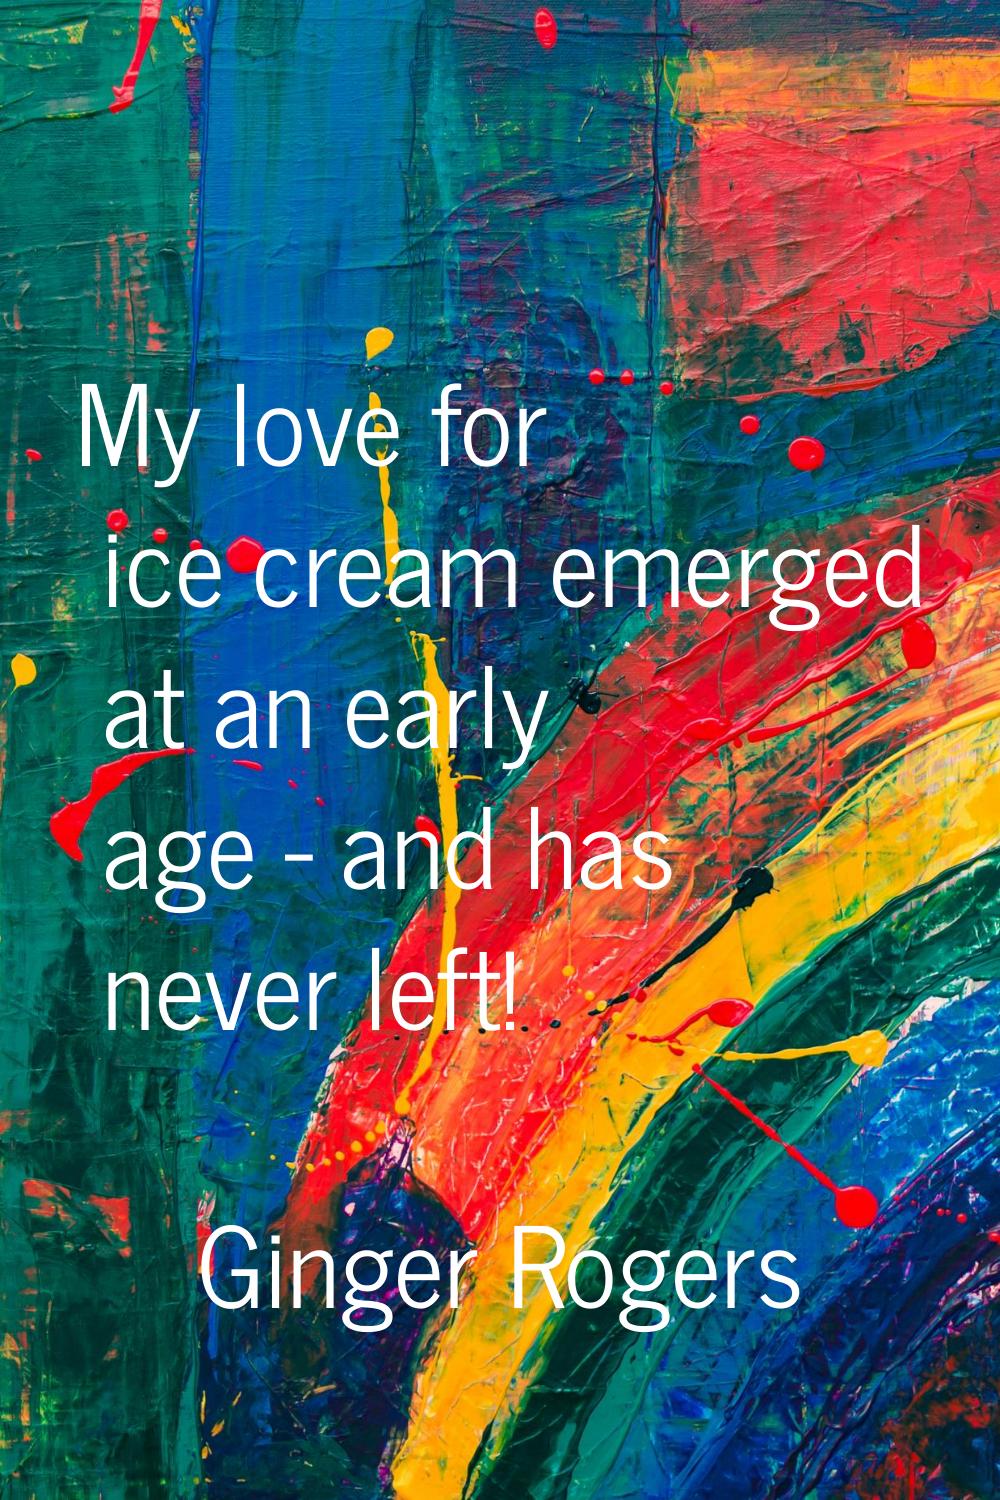 My love for ice cream emerged at an early age - and has never left!